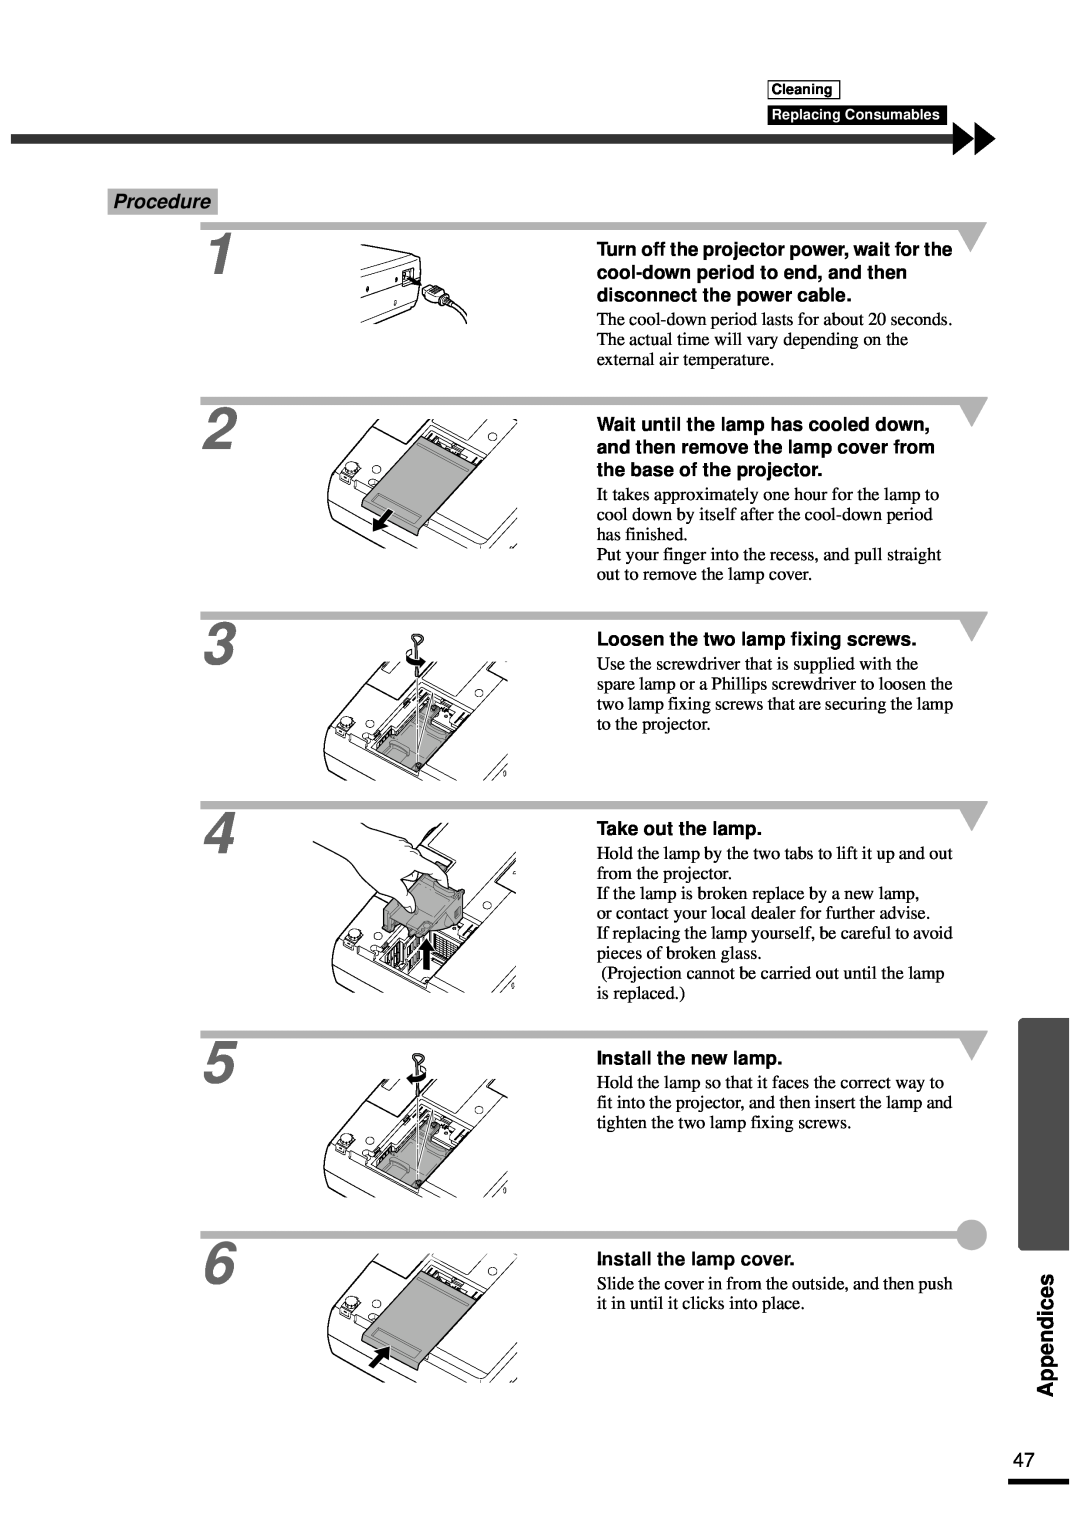 Epson EMP-30 manual Appendices, Procedure, Loosen the two lamp fixing screws, Take out the lamp, Install the new lamp 